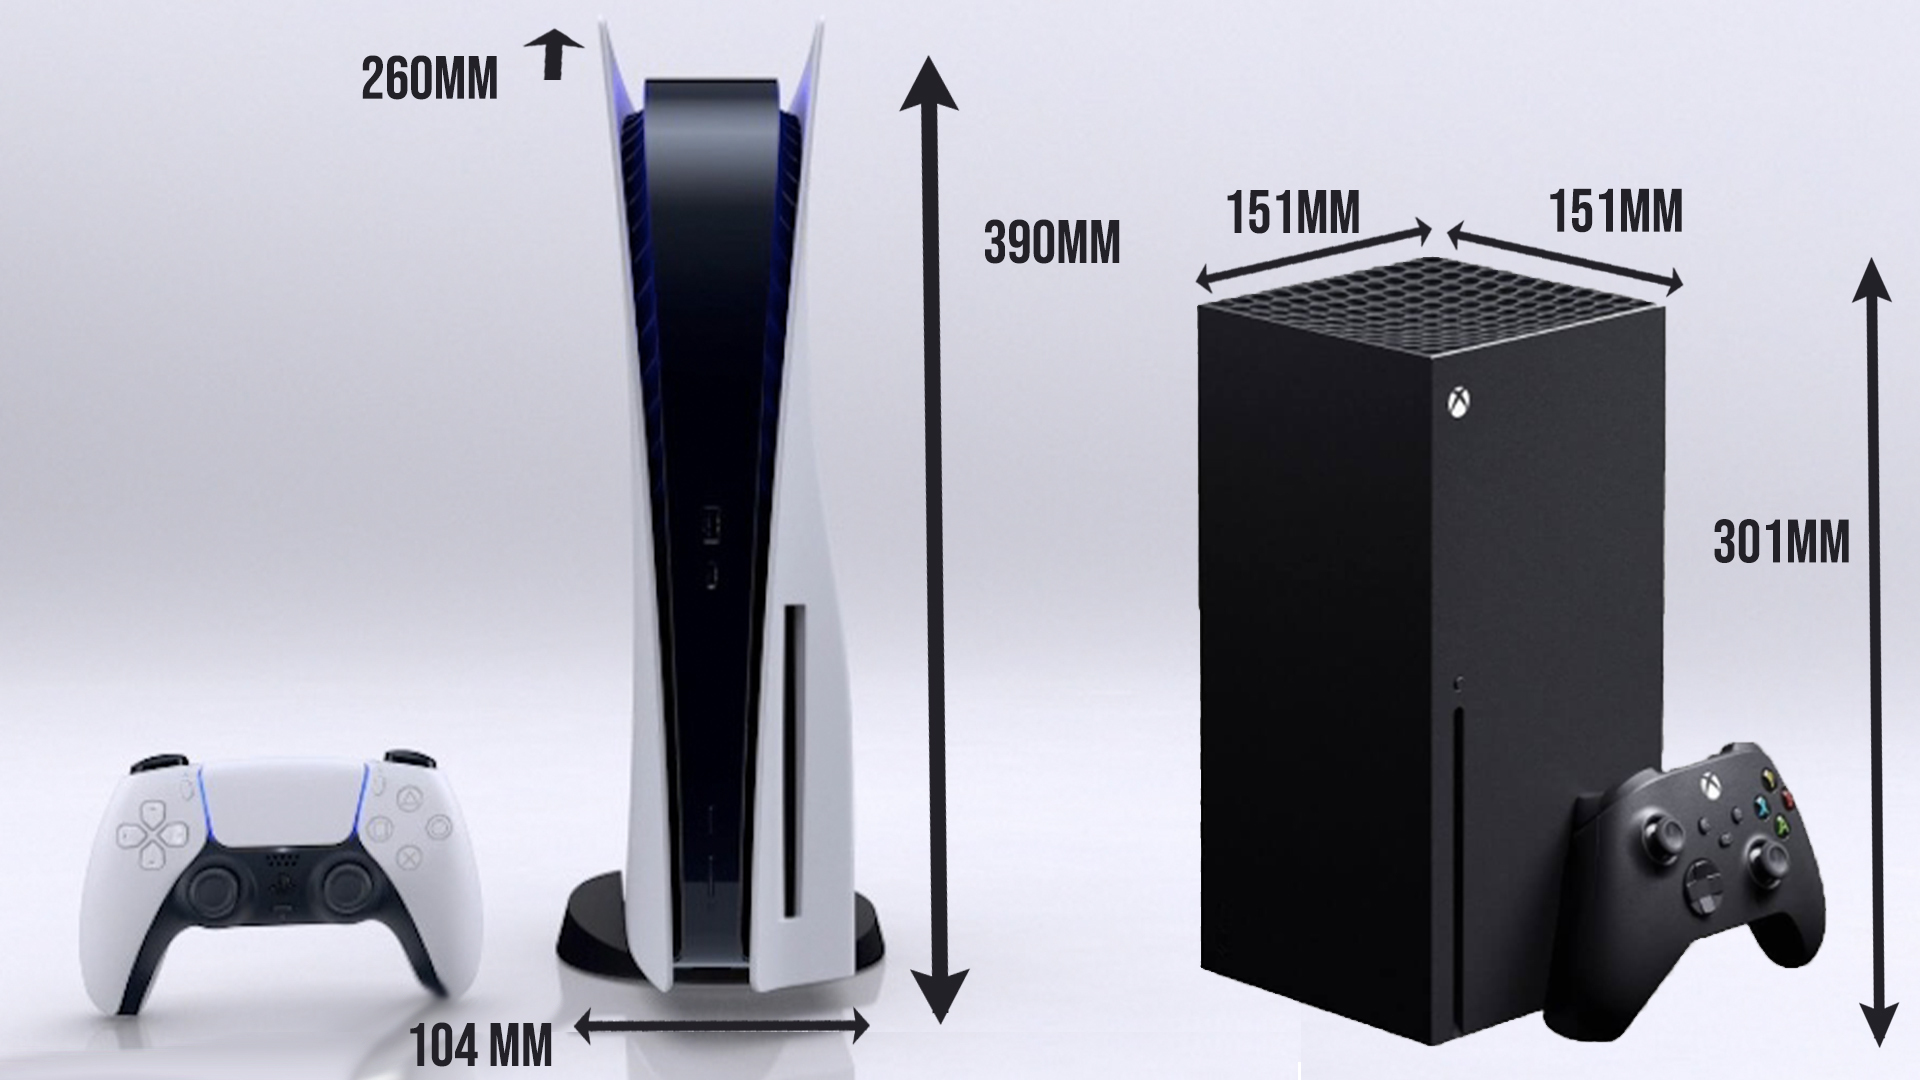 How big is the PS5? All your questions around the PS5 size answered